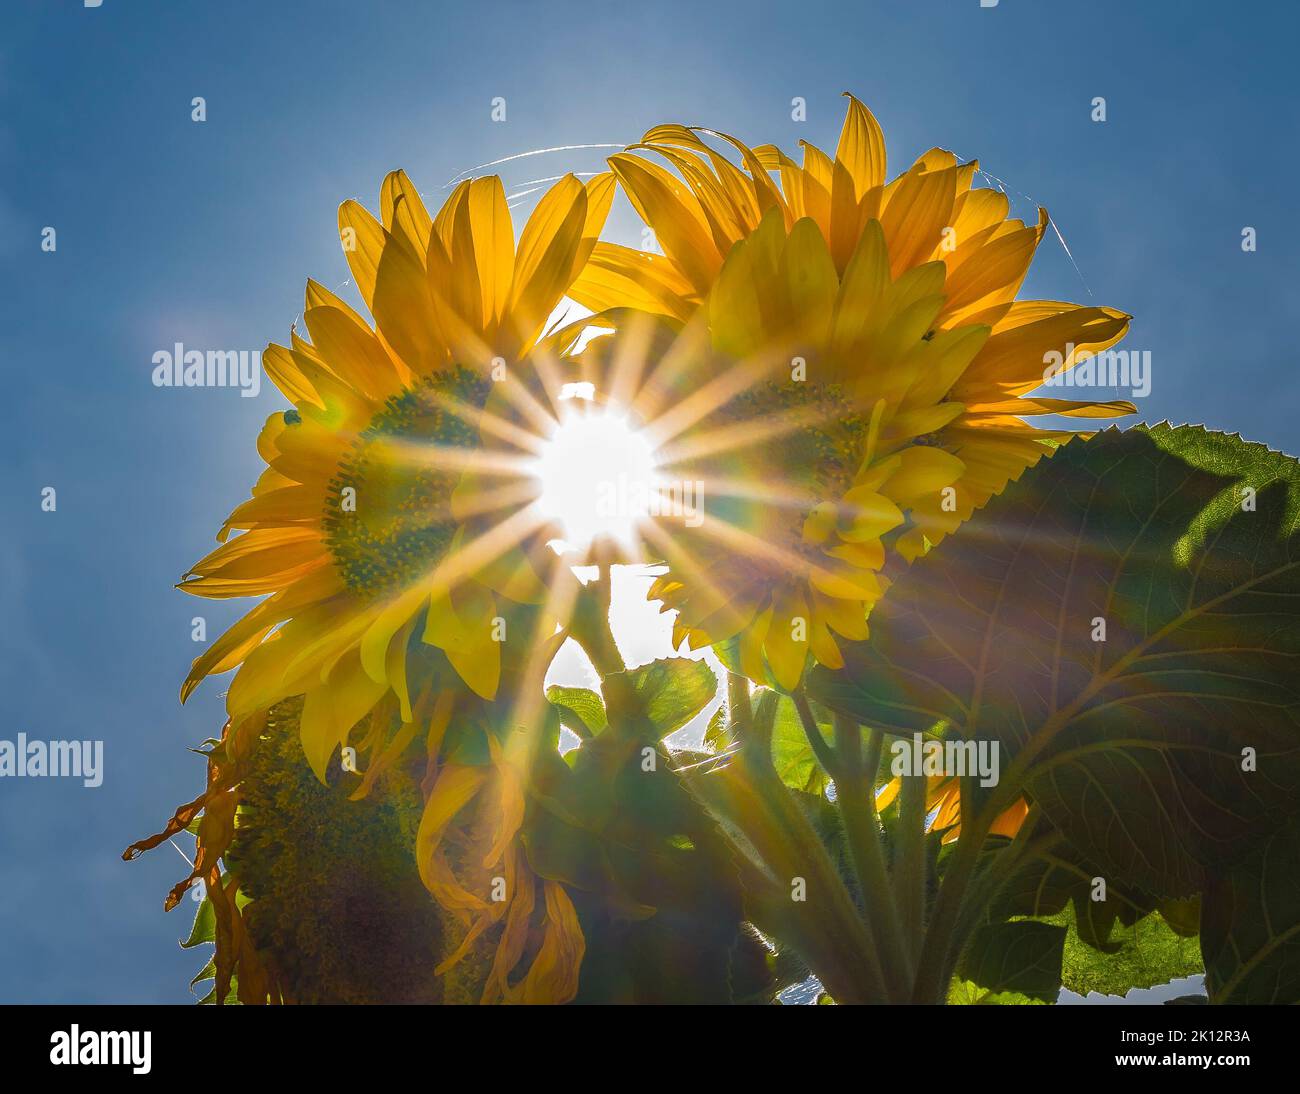 Kidderminster, UK. 14th July, 2022. UK weather: during the current heatwave, flowers struggle to maintain their beauty as temperatures have been constantly high for many weeks. Rainfall has been non-existent. There is a shining sunburst through a bunch of sunflower heads which are already starting to wilt with the current heatwave weather conditions. Credit: Lee Hudson Stock Photo